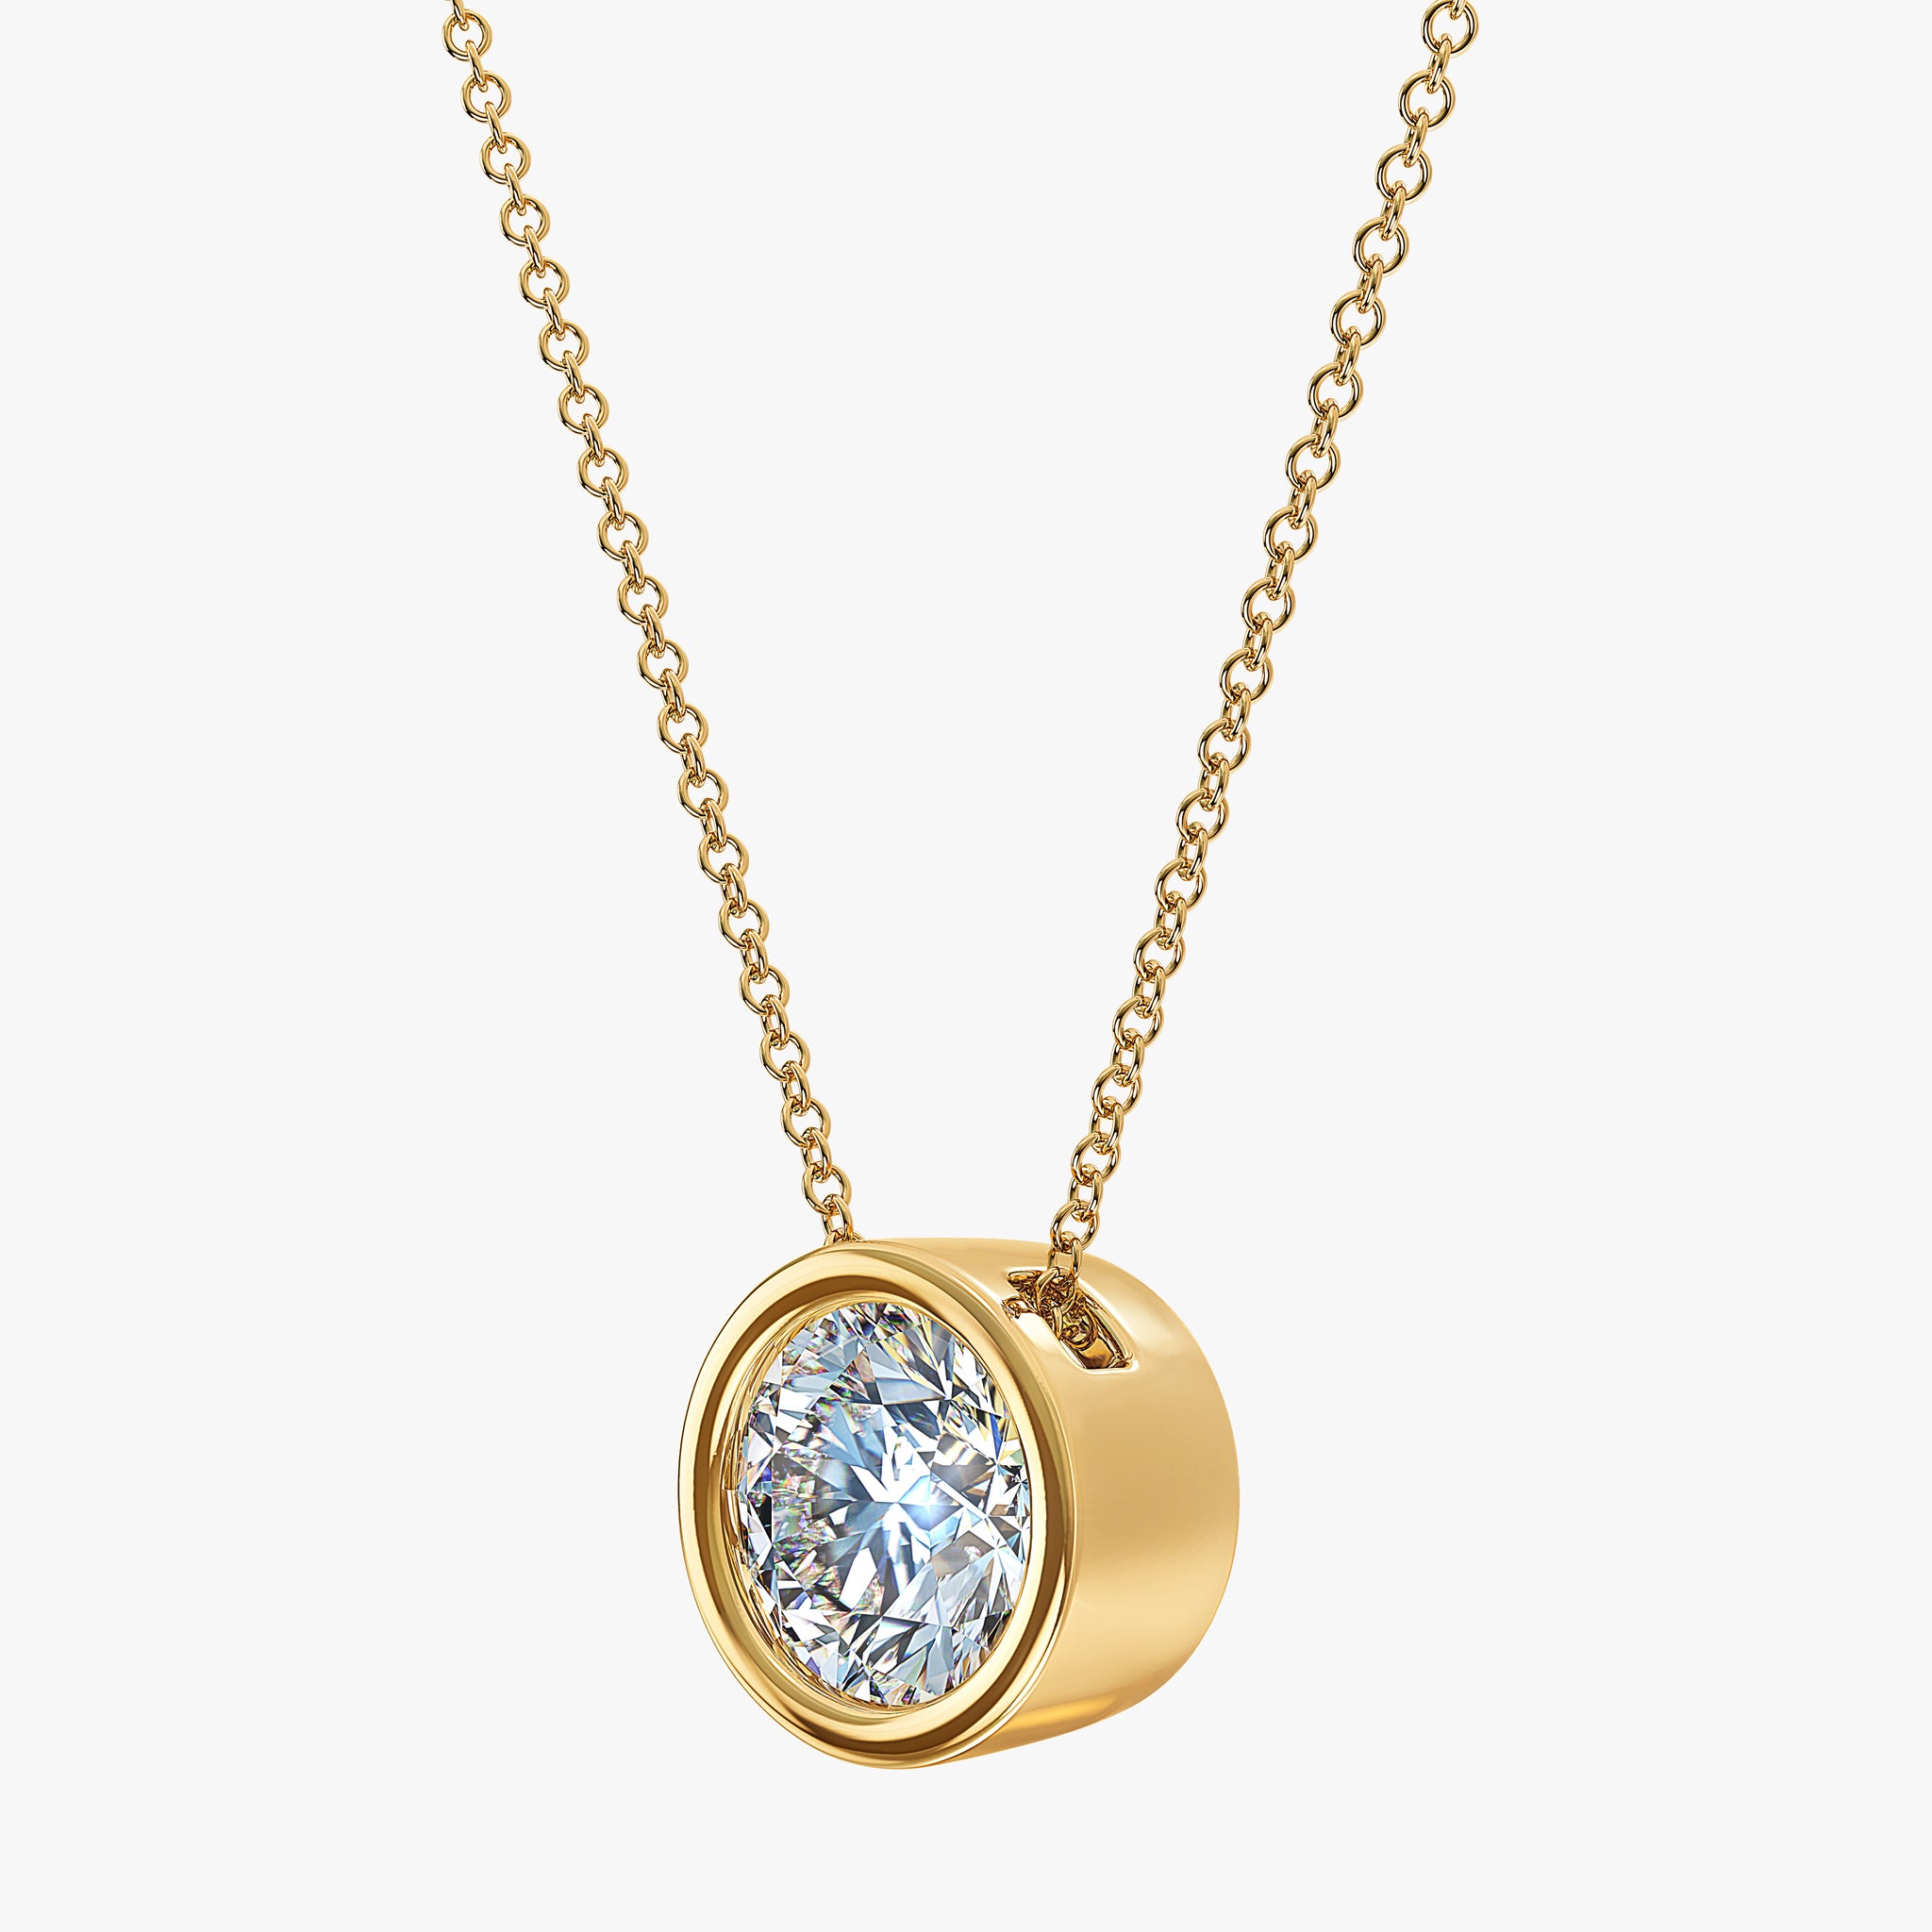 J'EVAR 14kt Yellow Gold Solitaire Diamond Necklace ALTR Lab Grown Bezel Solitaire Diamond Necklace Side Perpective View